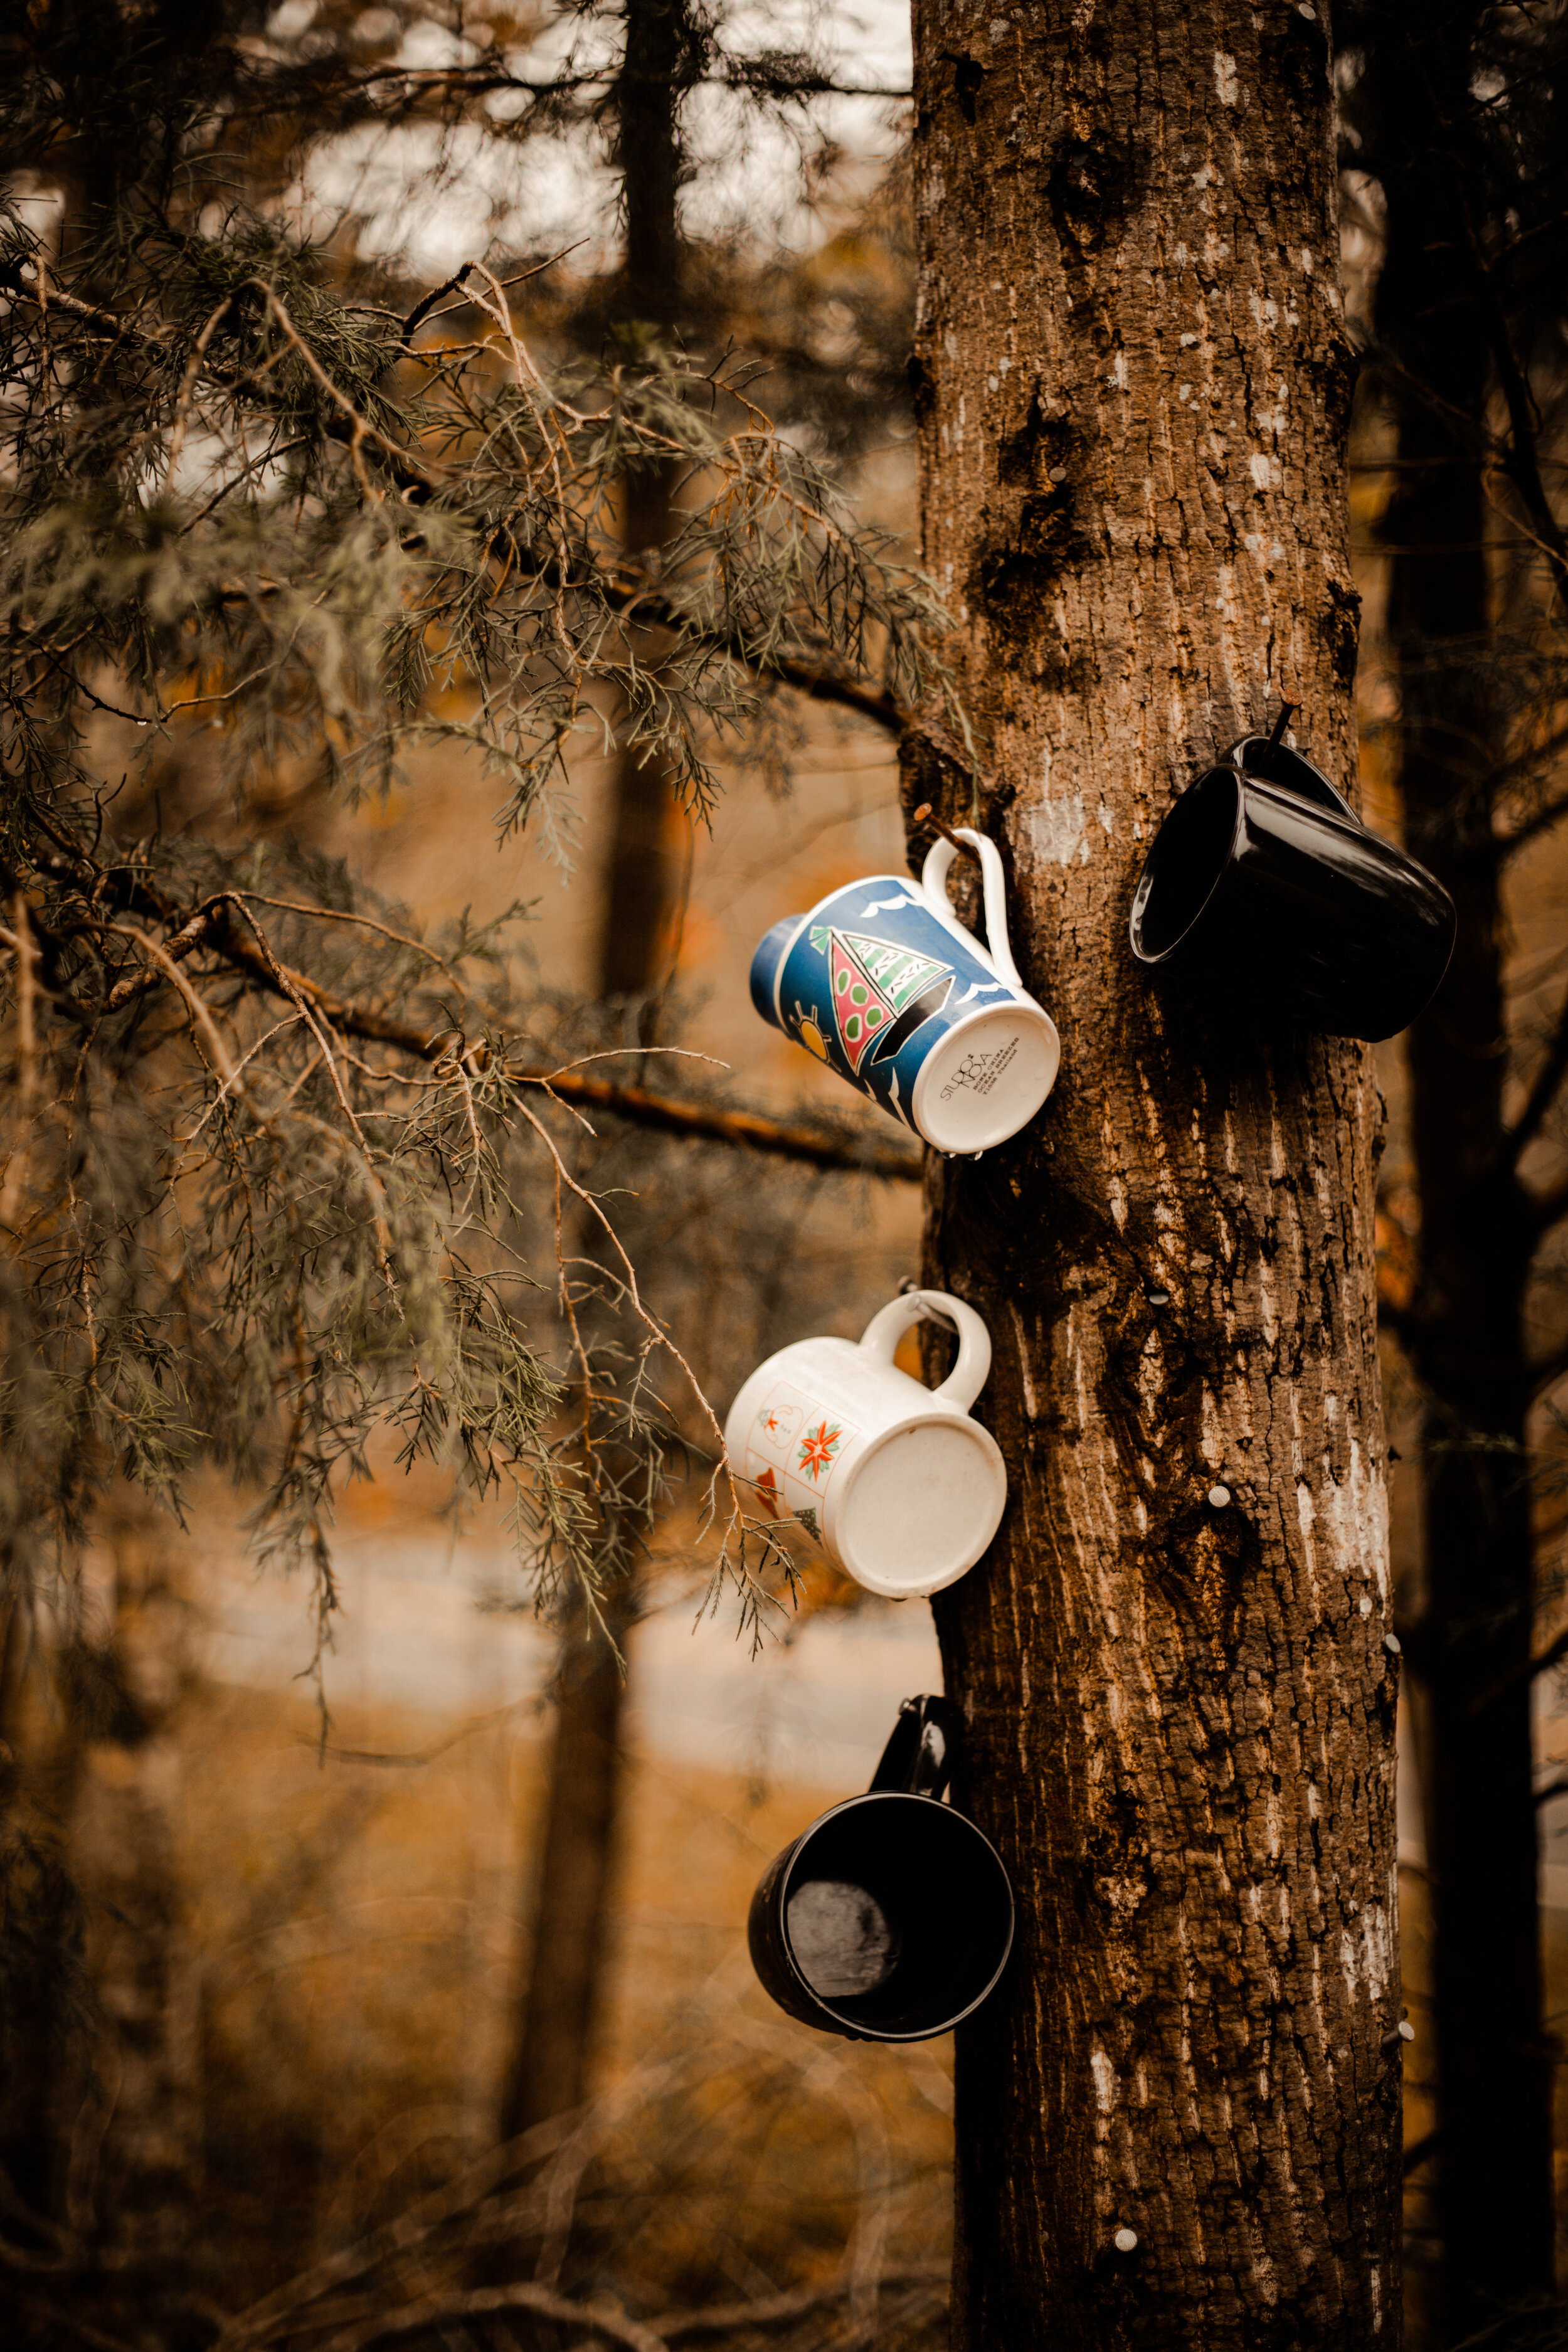 The mug tree is located off of Boswell Road just a few minutes away from NGU. And, as you probably guessed from the name, it is a tree covered with various mugs.